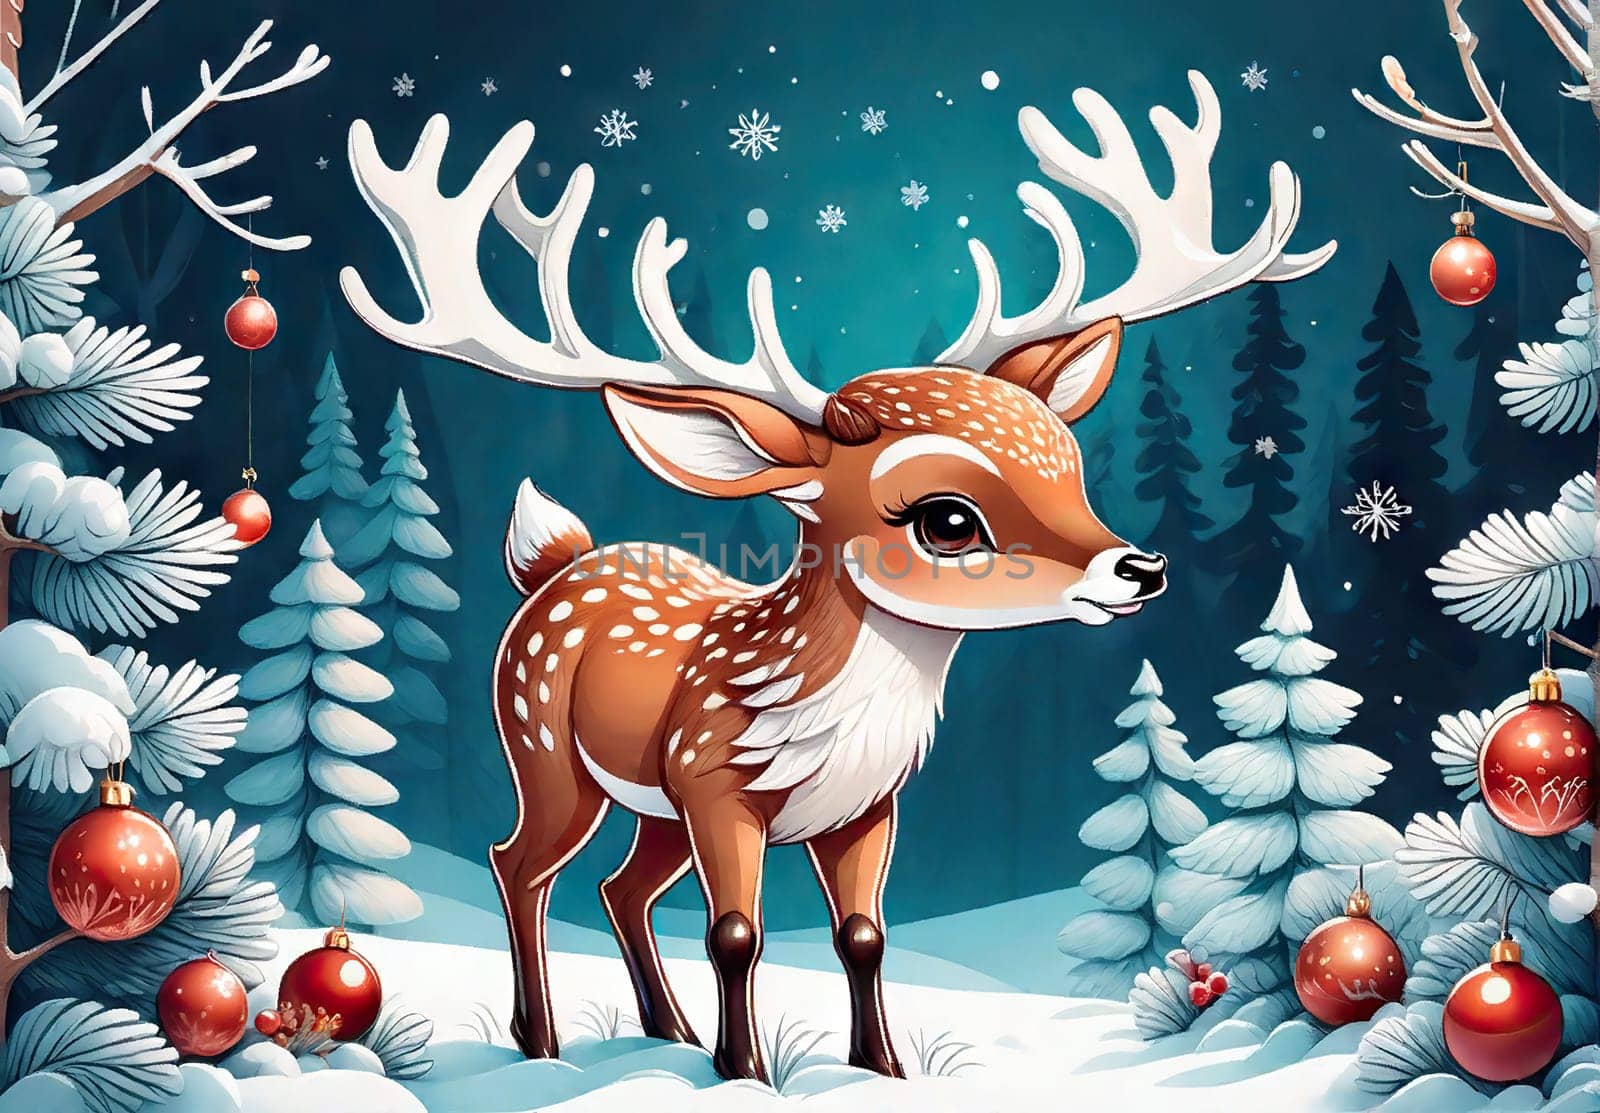 Merry Christmas and happy new year greeting card with cute deer. Holiday cartoon character in winter season. by EkaterinaPereslavtseva